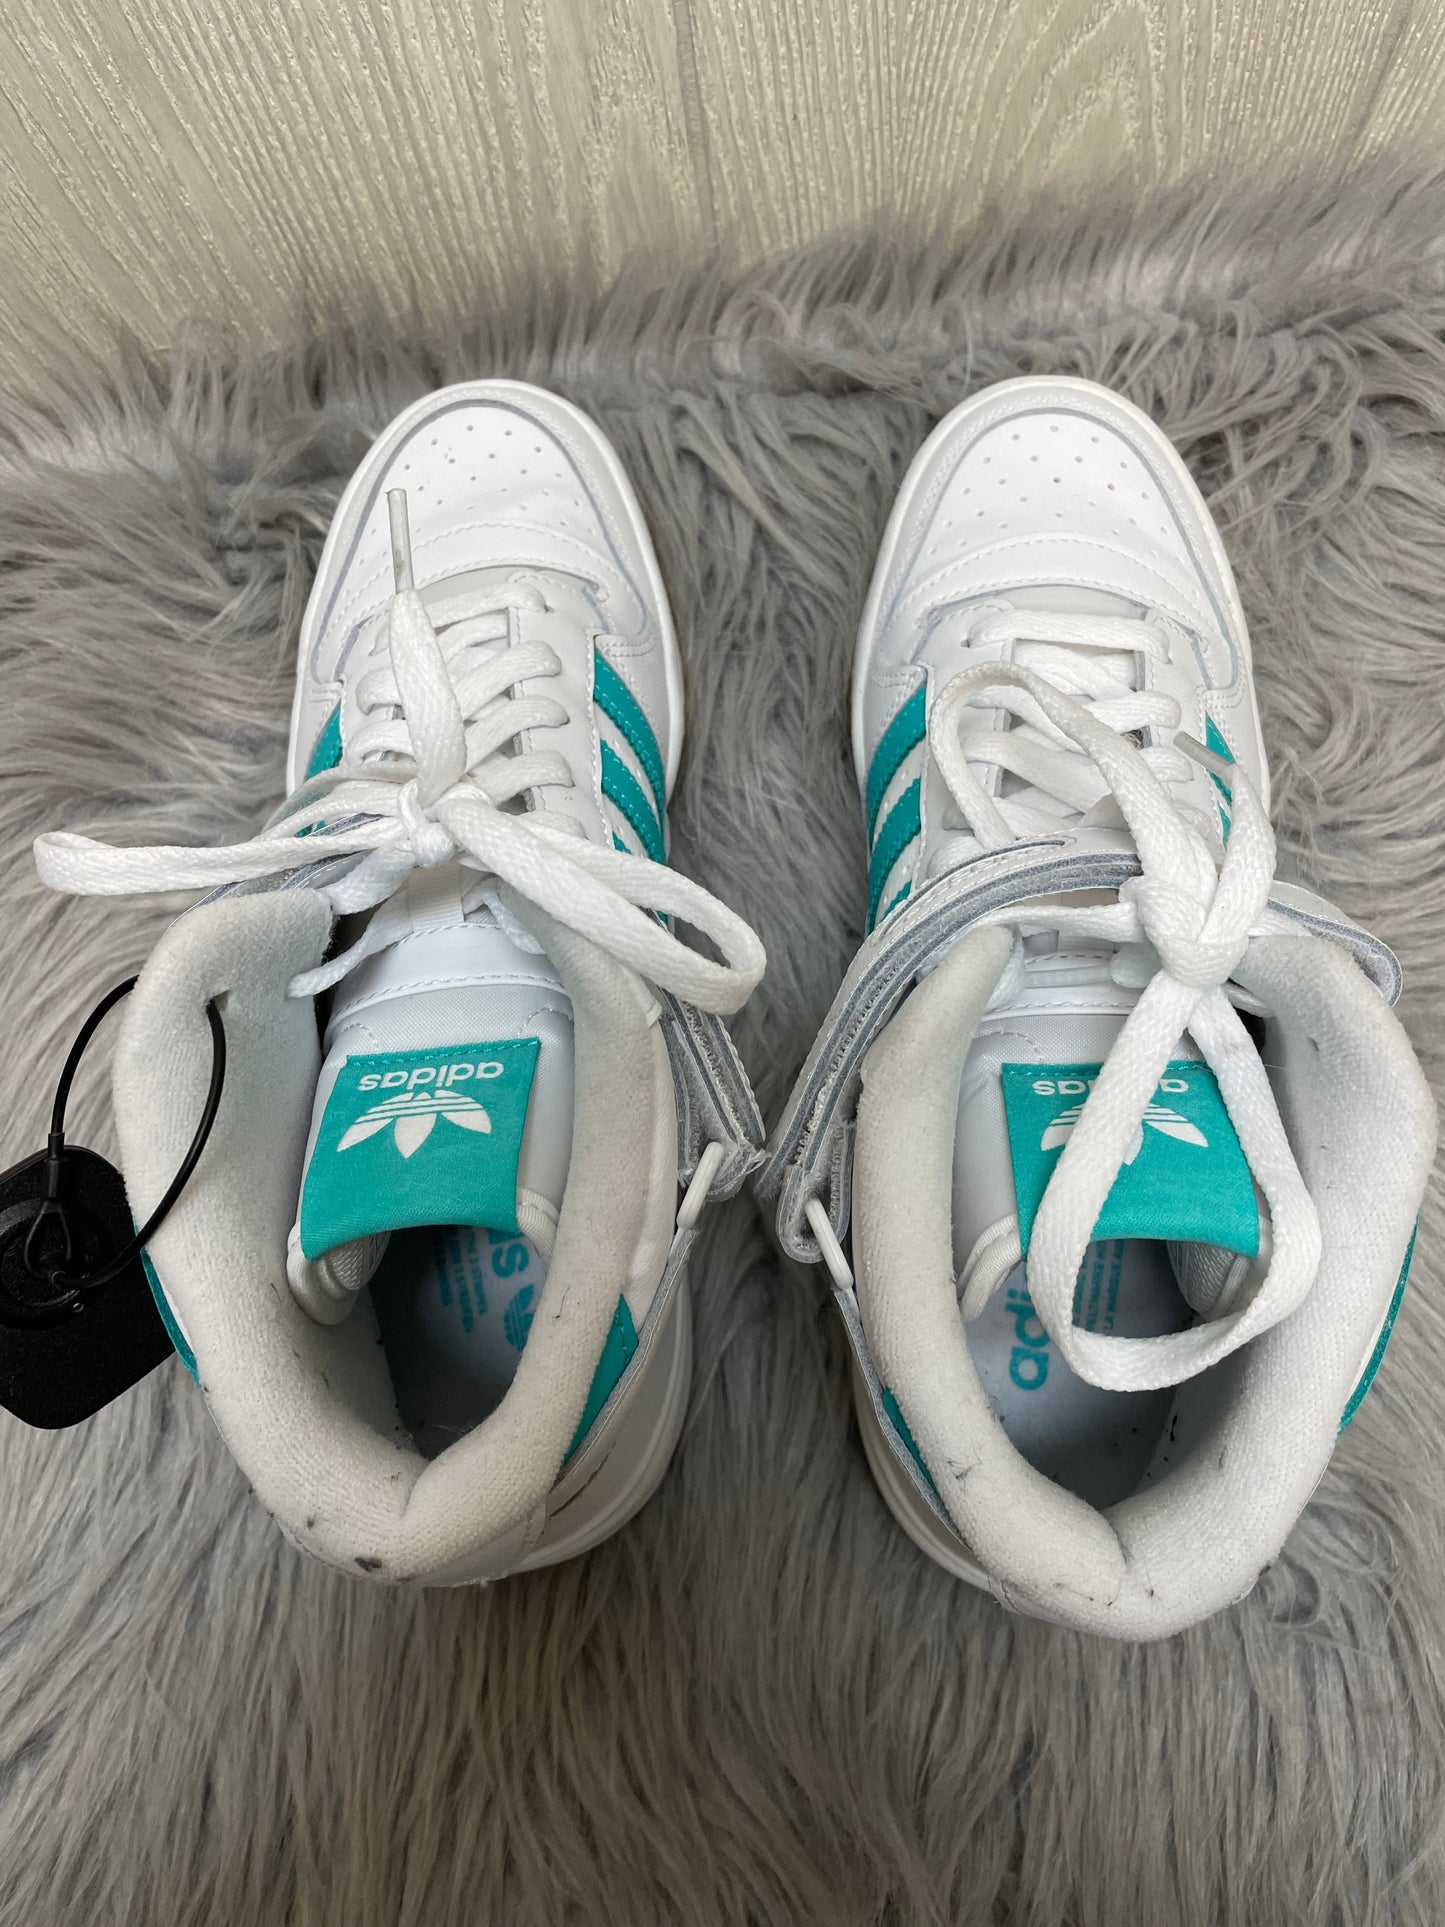 Green & White Shoes Athletic Adidas, Size 9.5